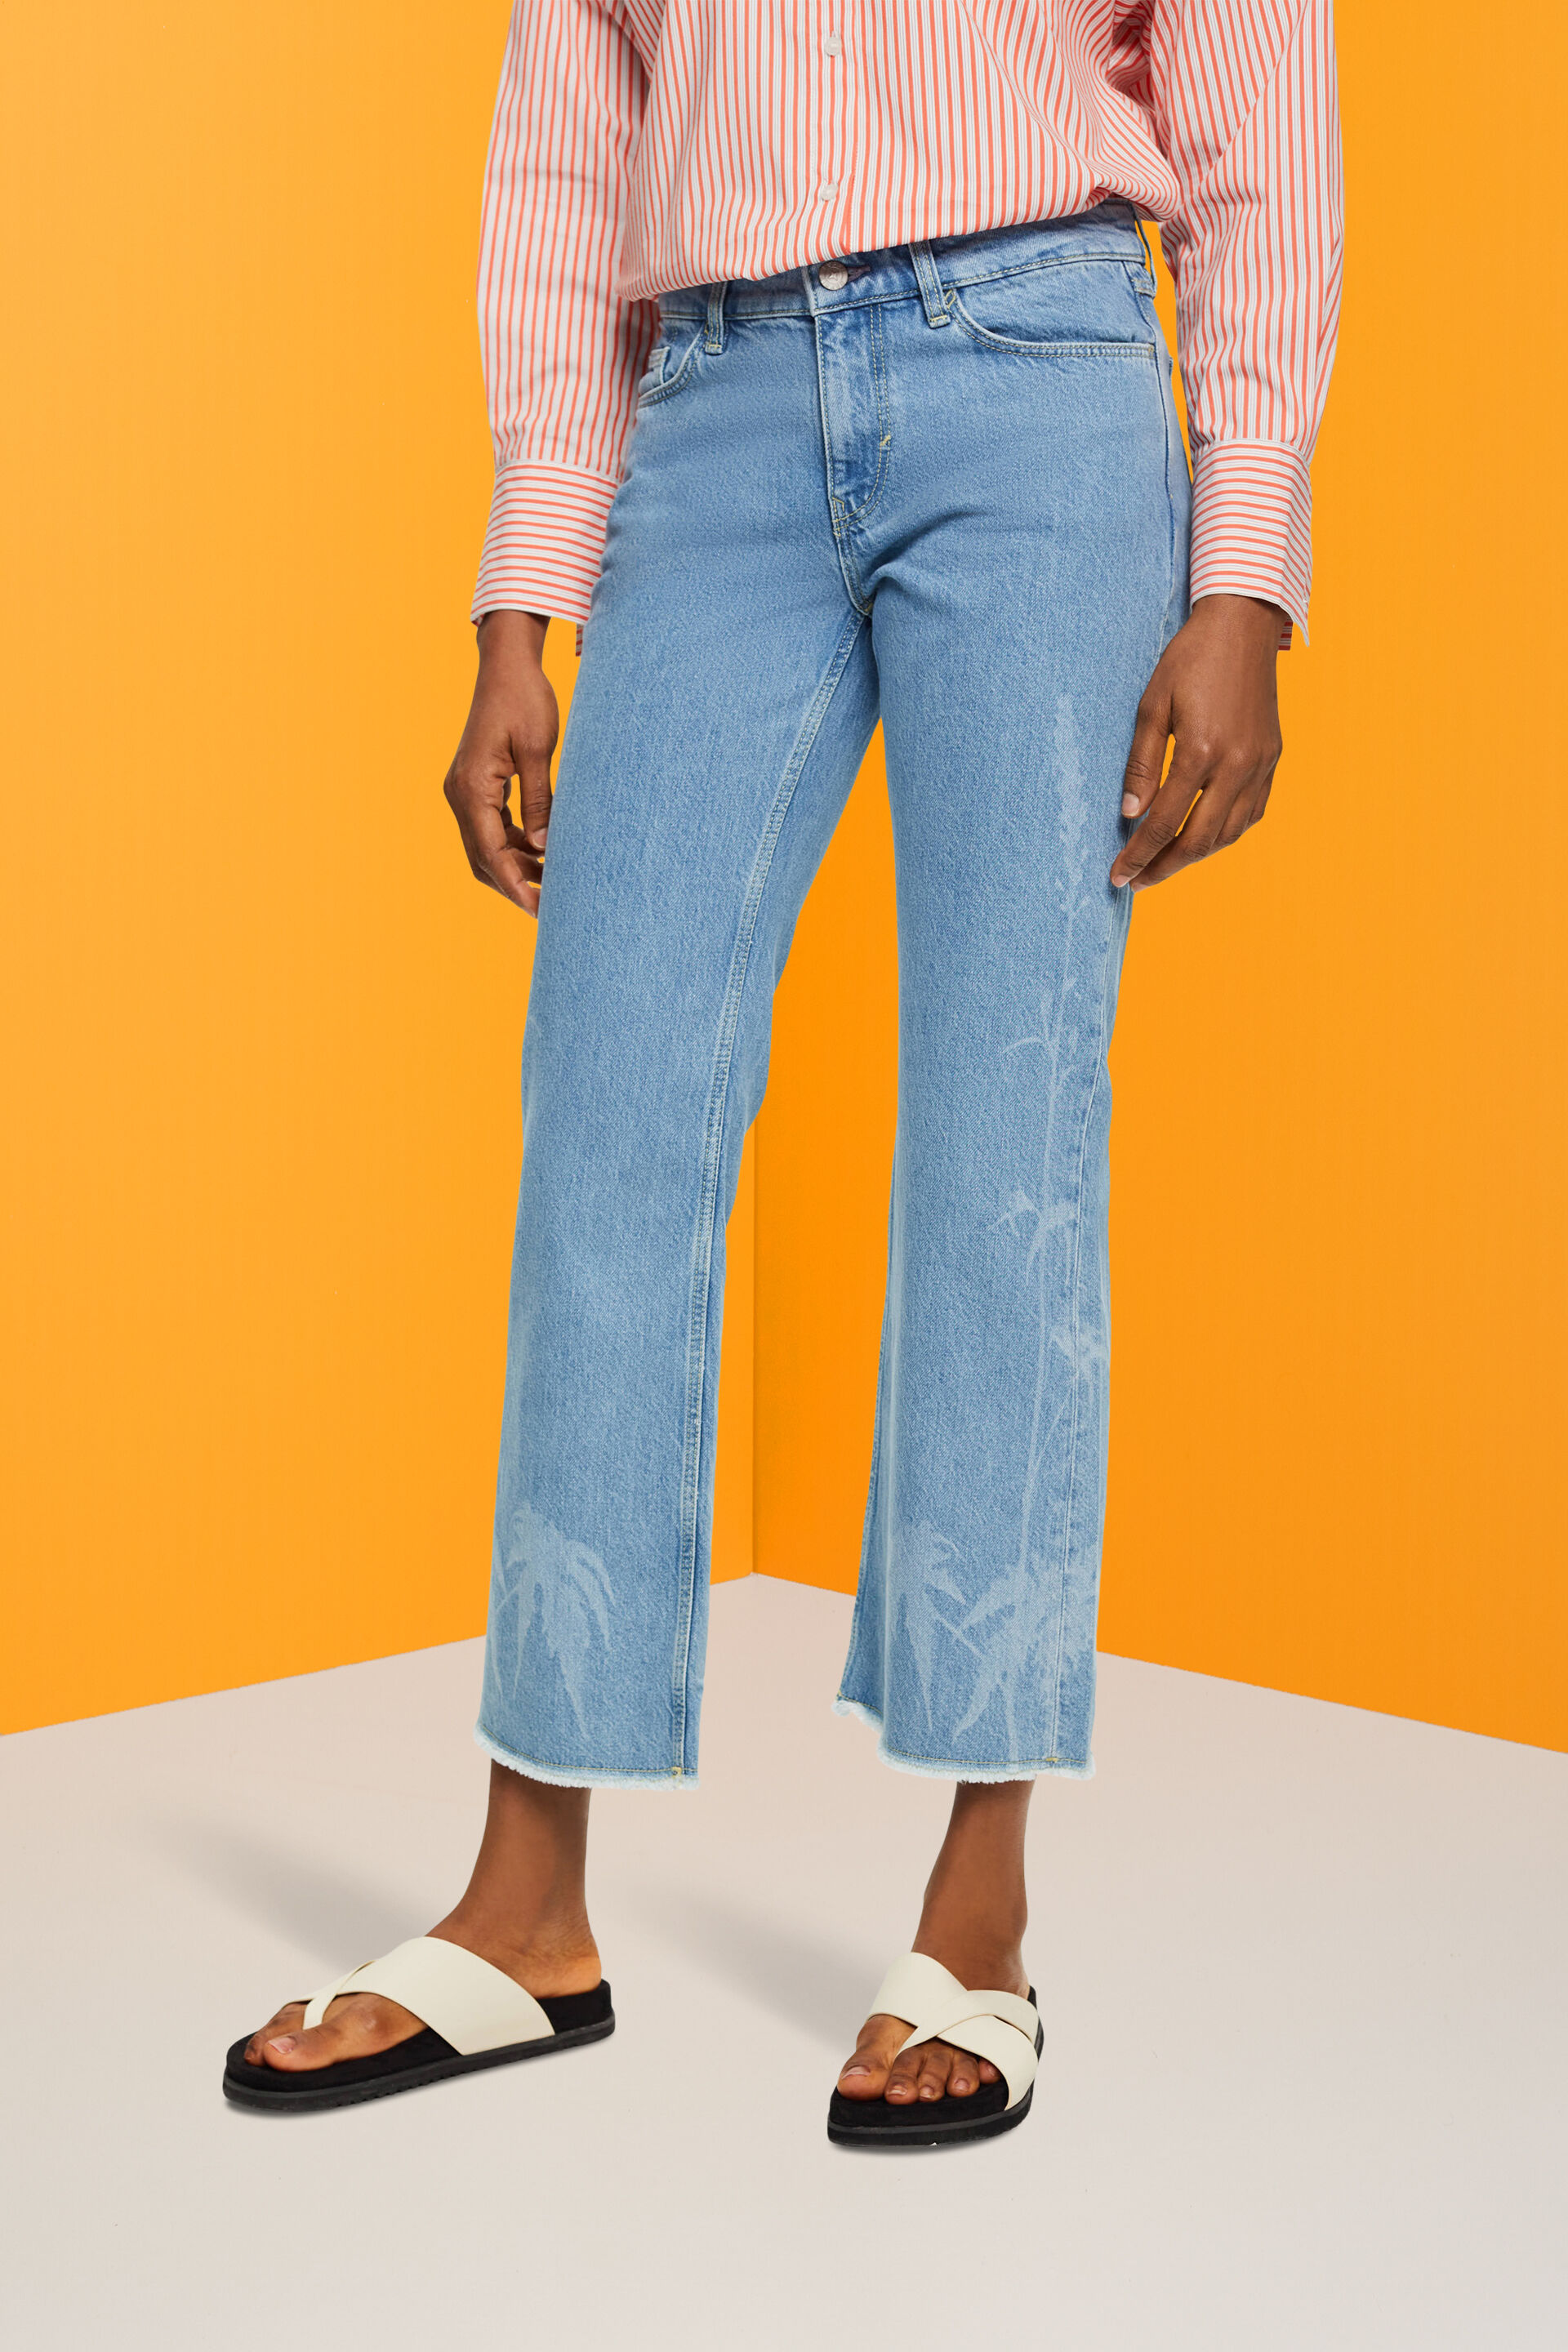 Women's Jeans High-Waisted Straight-Leg Jeans Spring Women's Cropped  Trousers | Womens cropped trousers, Lightweight denim, Women jeans